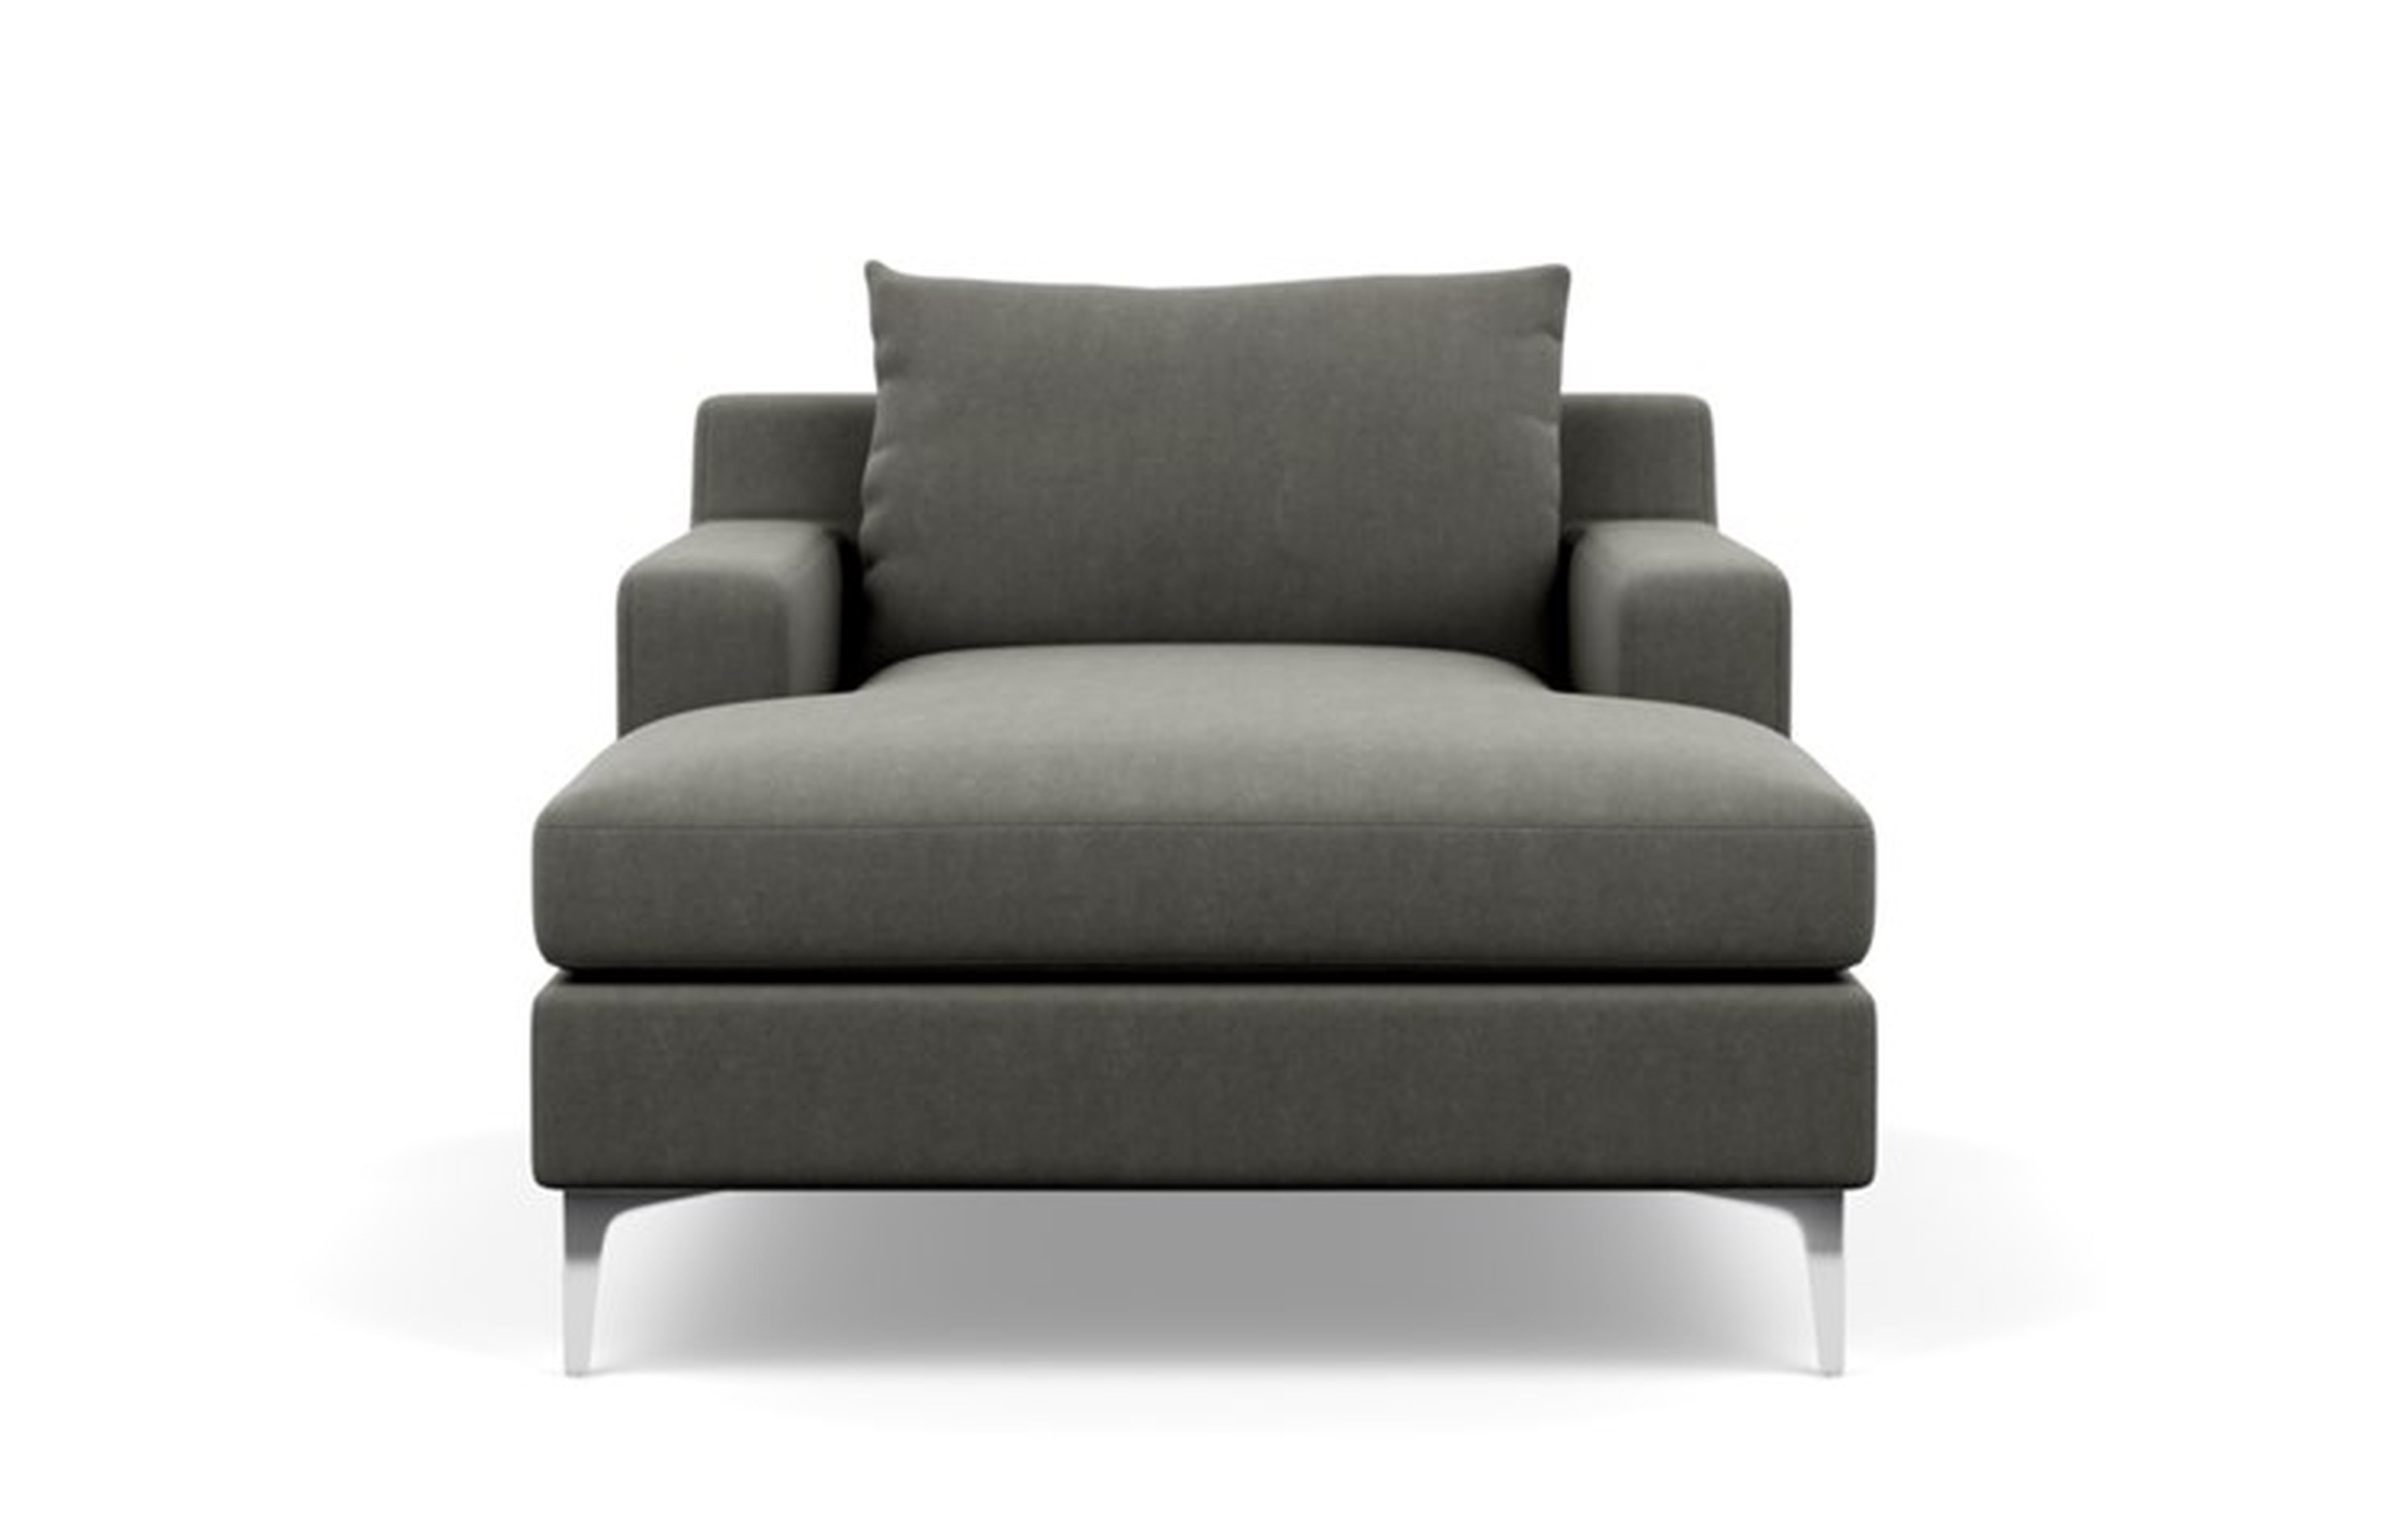 Sloan Chaise Chaise Lounge with Grey Tent Fabric, down alt. cushions, and Chrome Plated legs - Interior Define